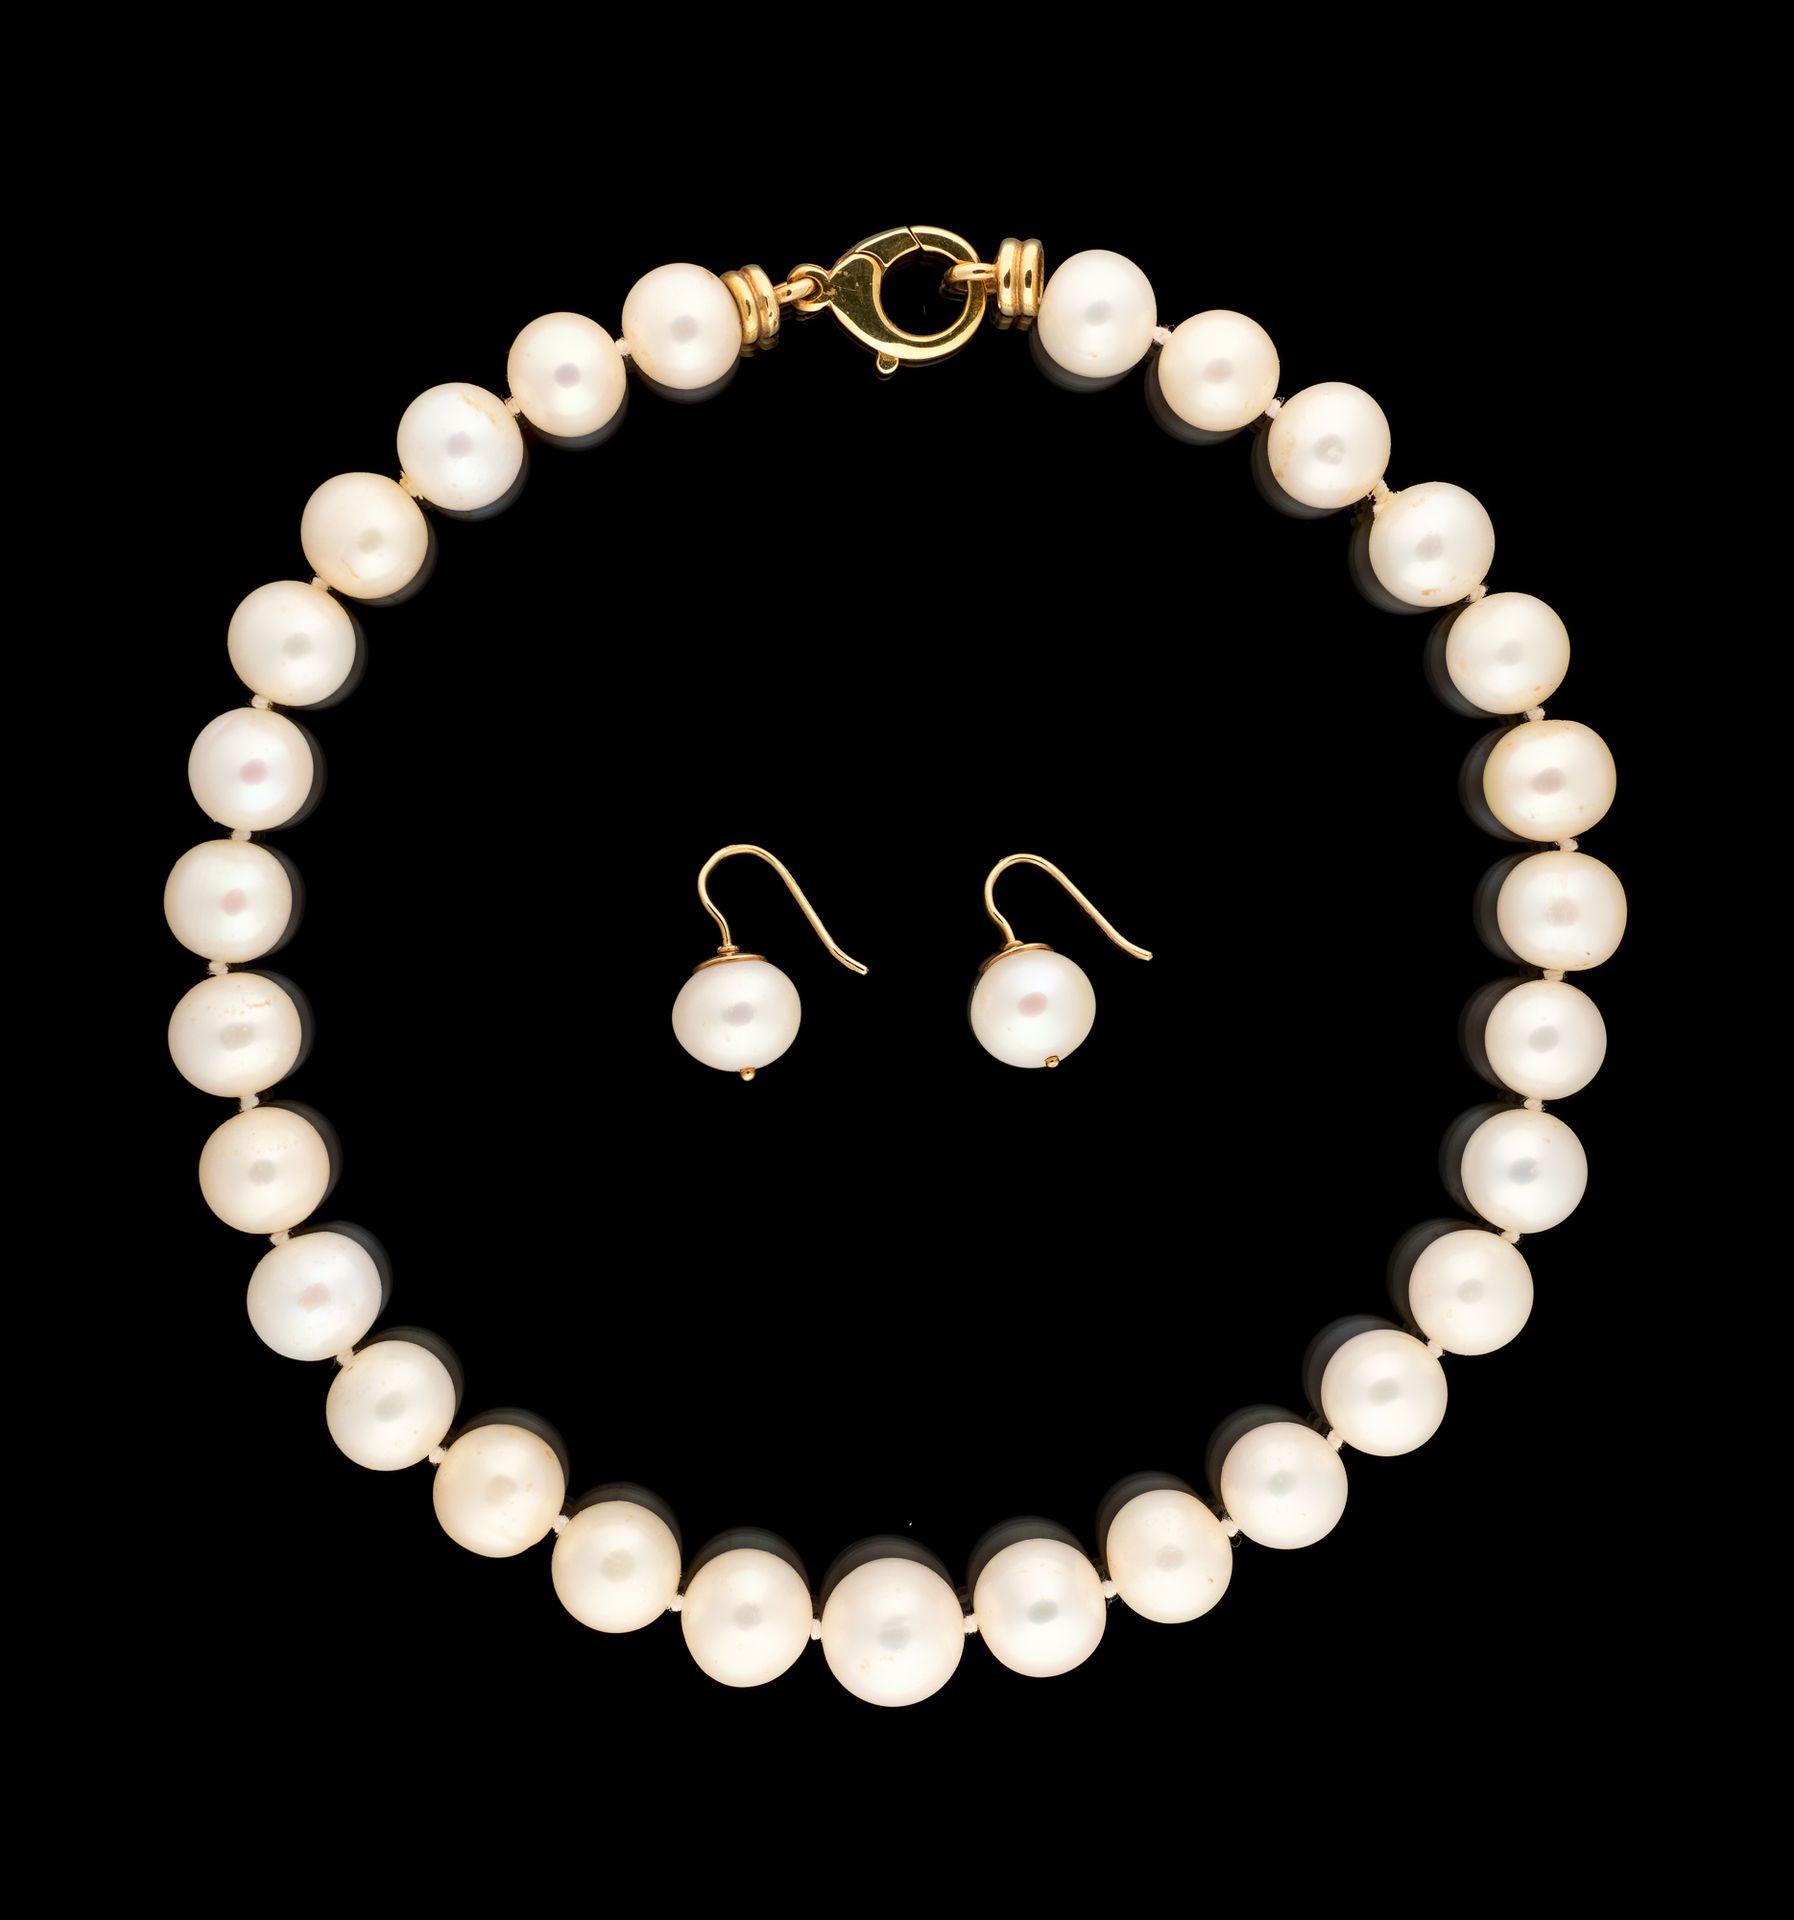 Joaillerie. Jewelry: Necklace of cultured pearls from the South Seas with twenty&hellip;